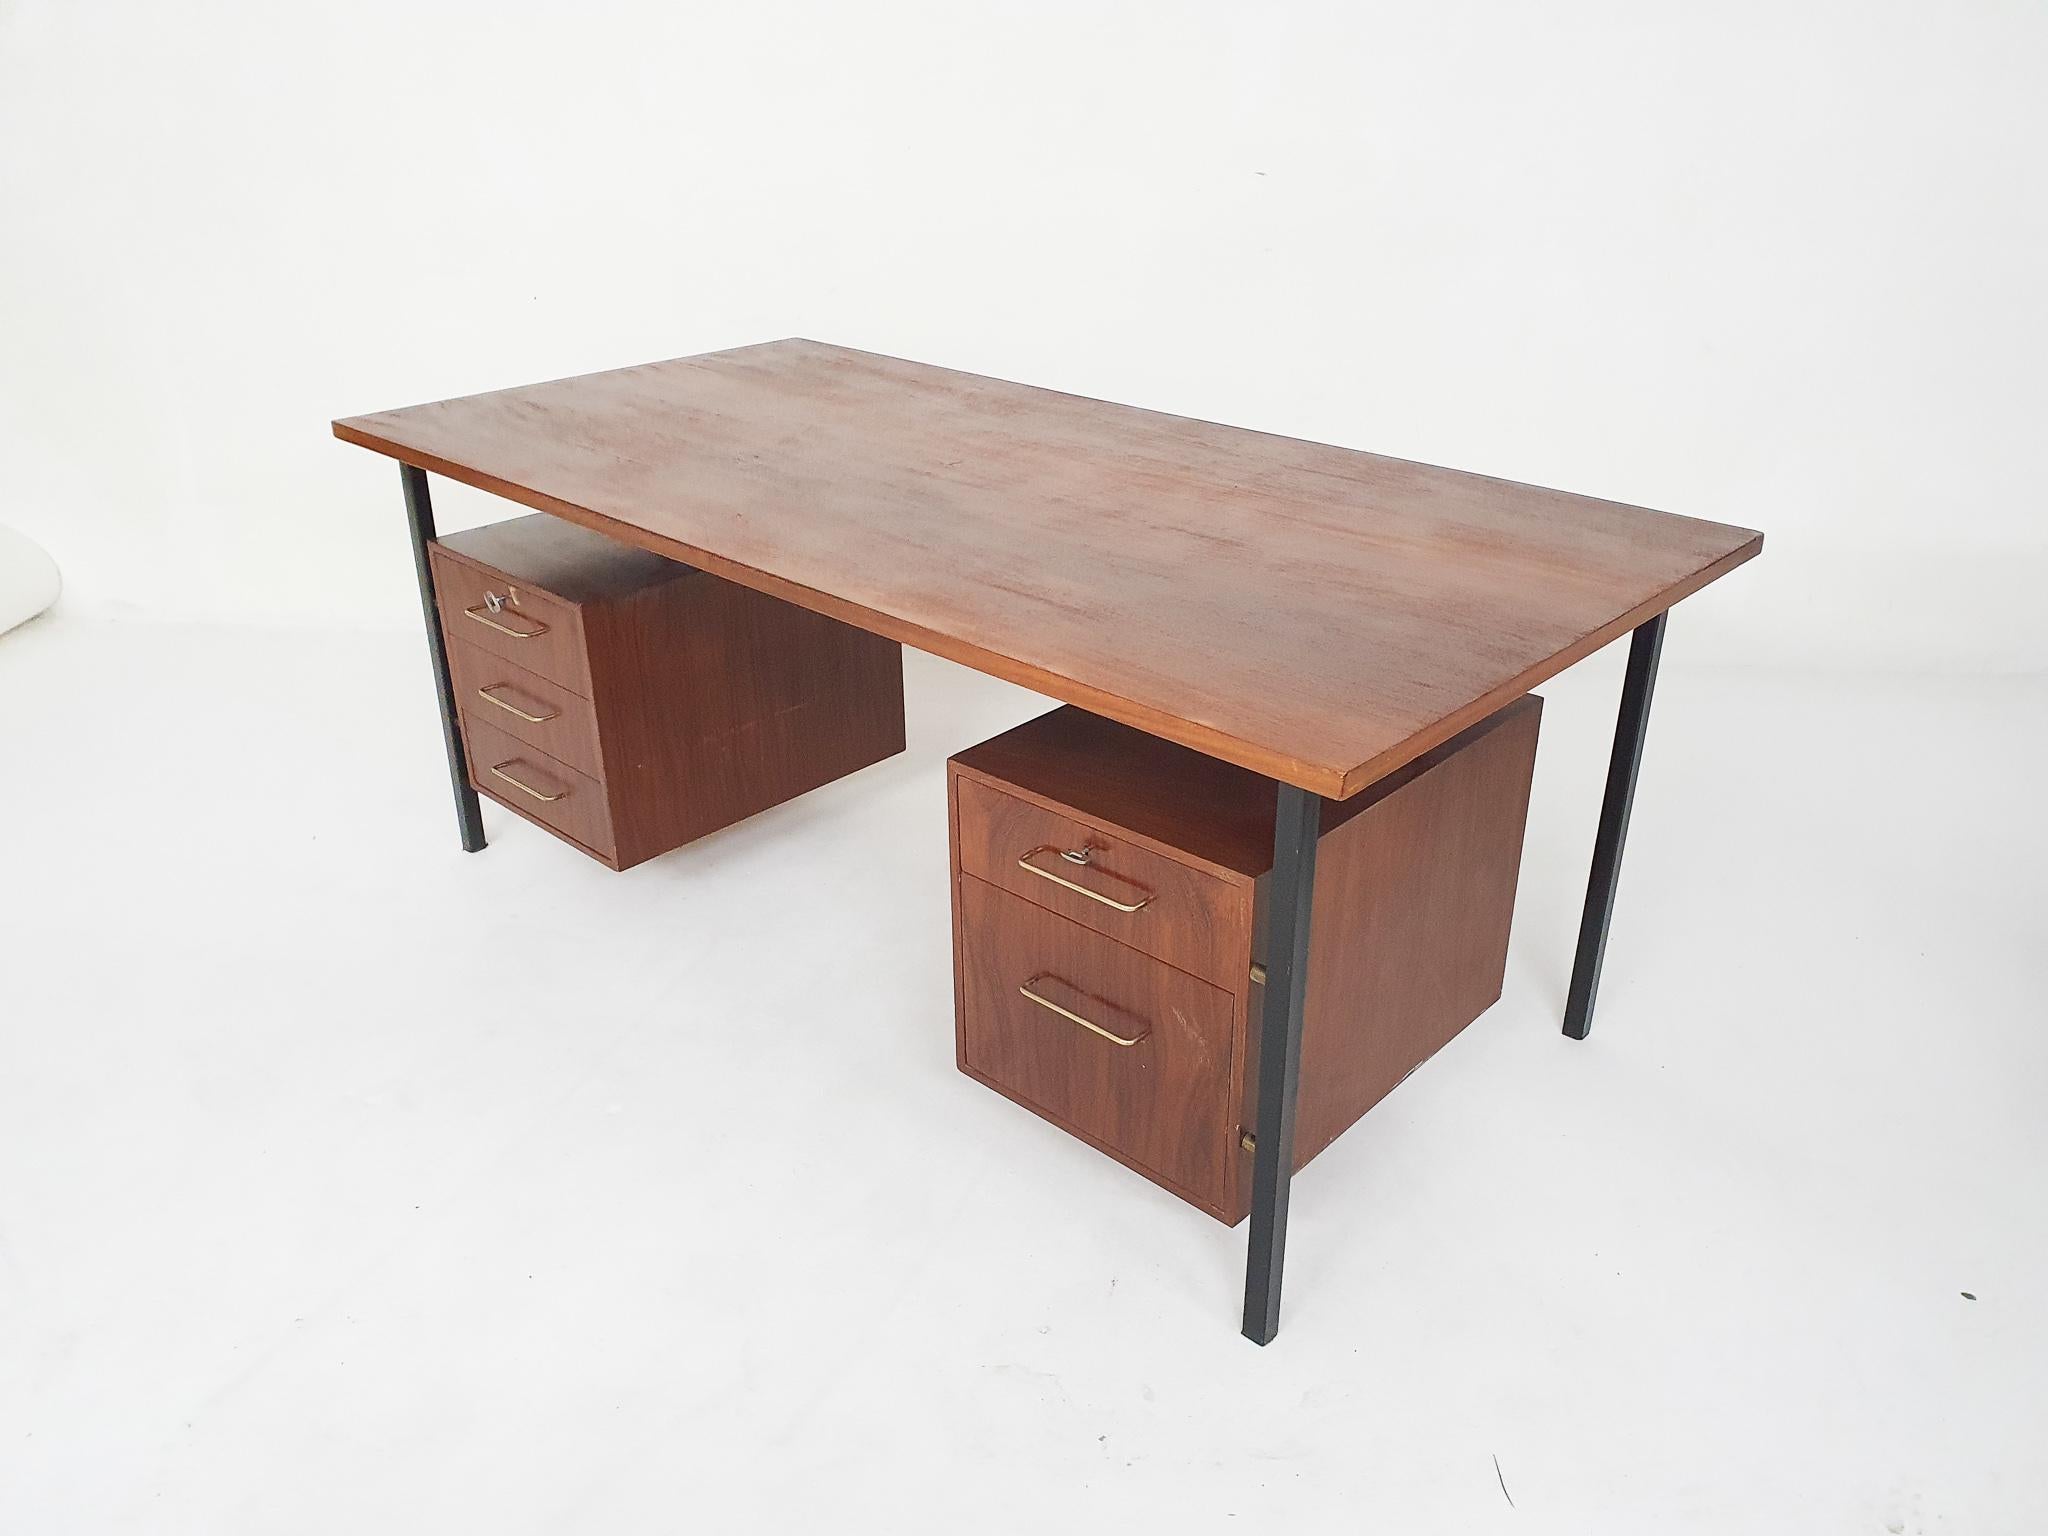 20th Century Large Teak and Metal Executive Desk, the Netherlands, 1950s